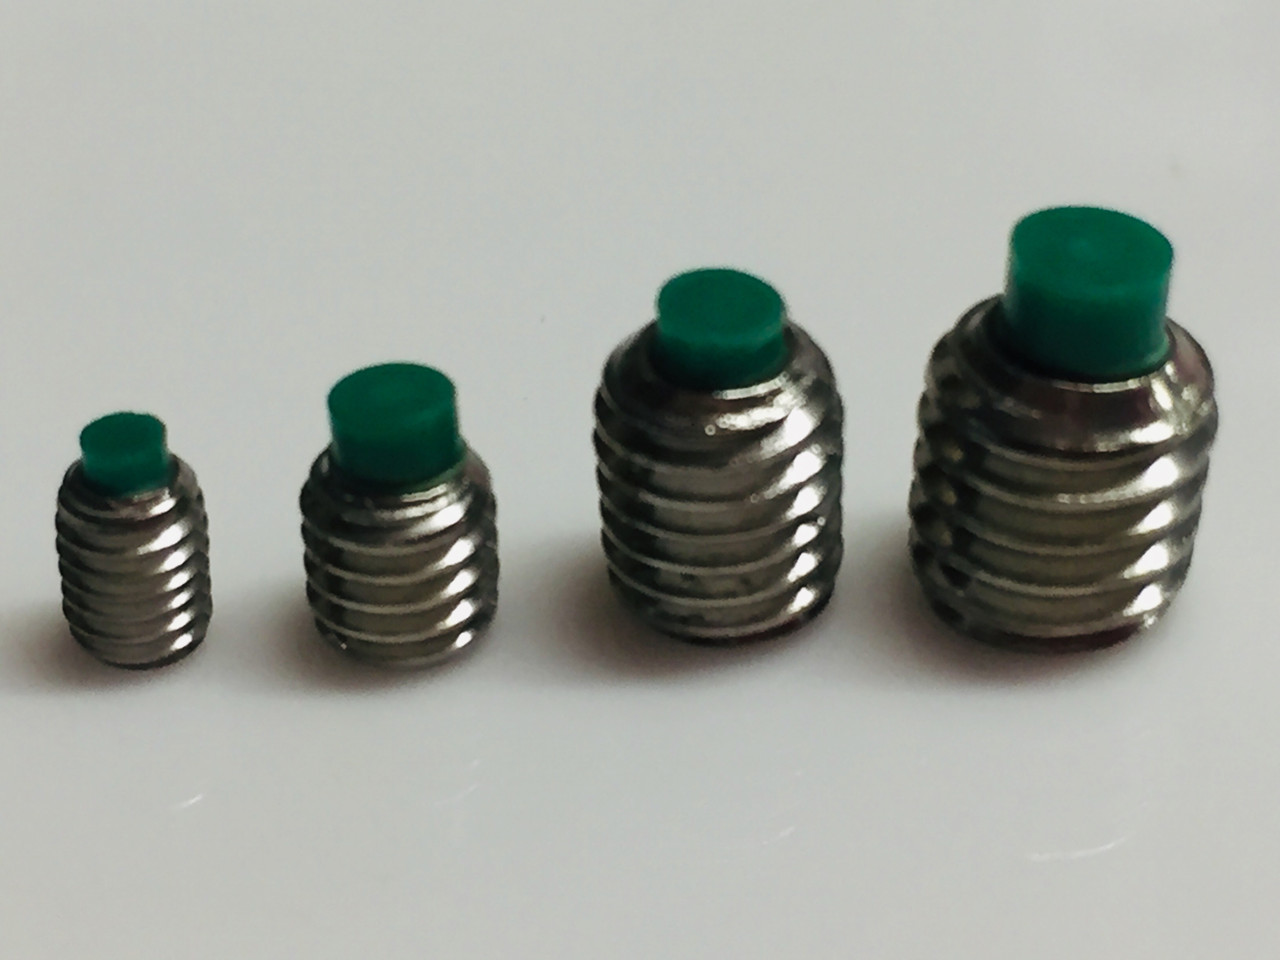 Nylon Tip Grub Screws are Manufactured from 304 Stainless Steel A2, with a self Colour Finish M3 x 5mm, M4 x 5mm, M5 x 7mm, M6 x 7.5mm (Pack of 16)